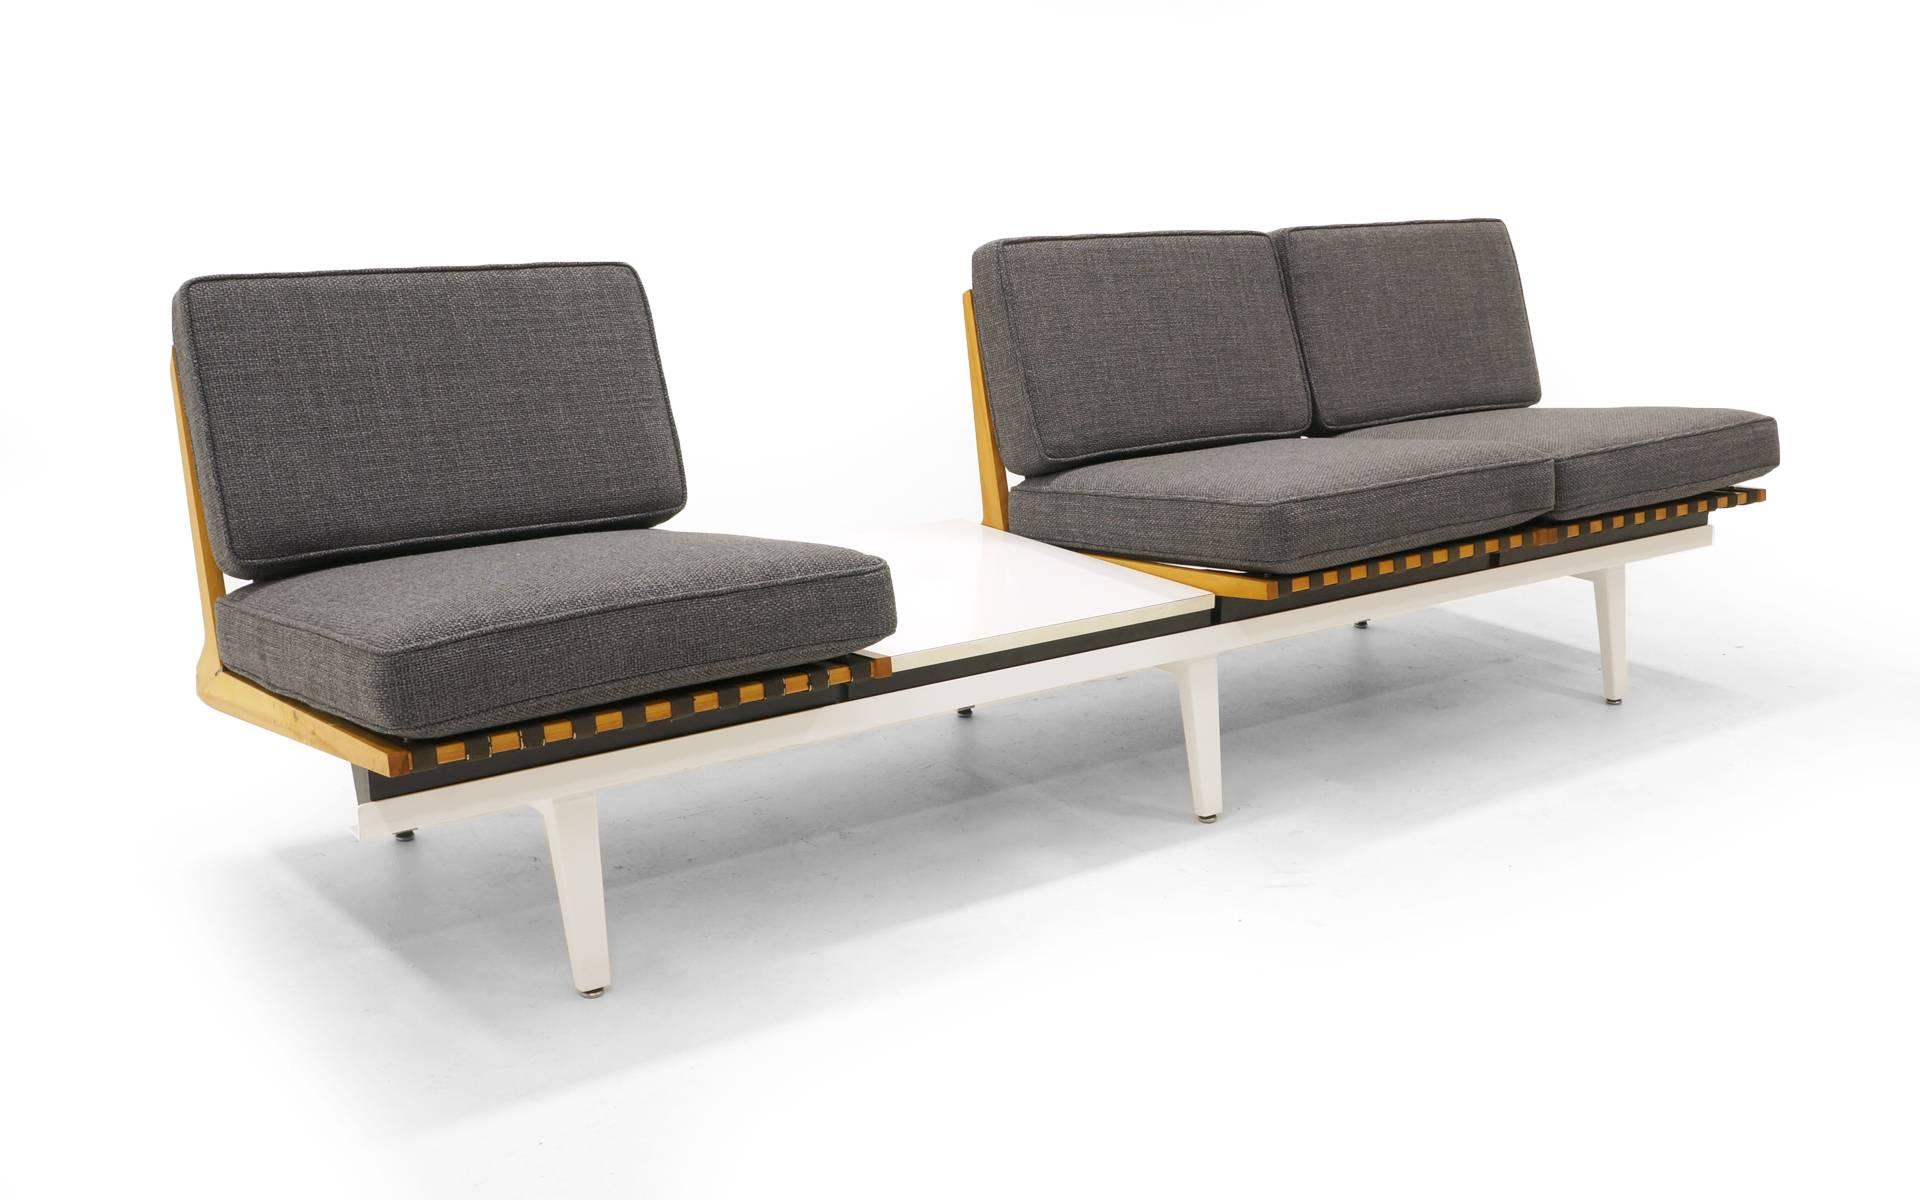 Mid-Century Modern Steel Frame Sofa, Bench and Coffee Table by George Nelson for Herman Miller